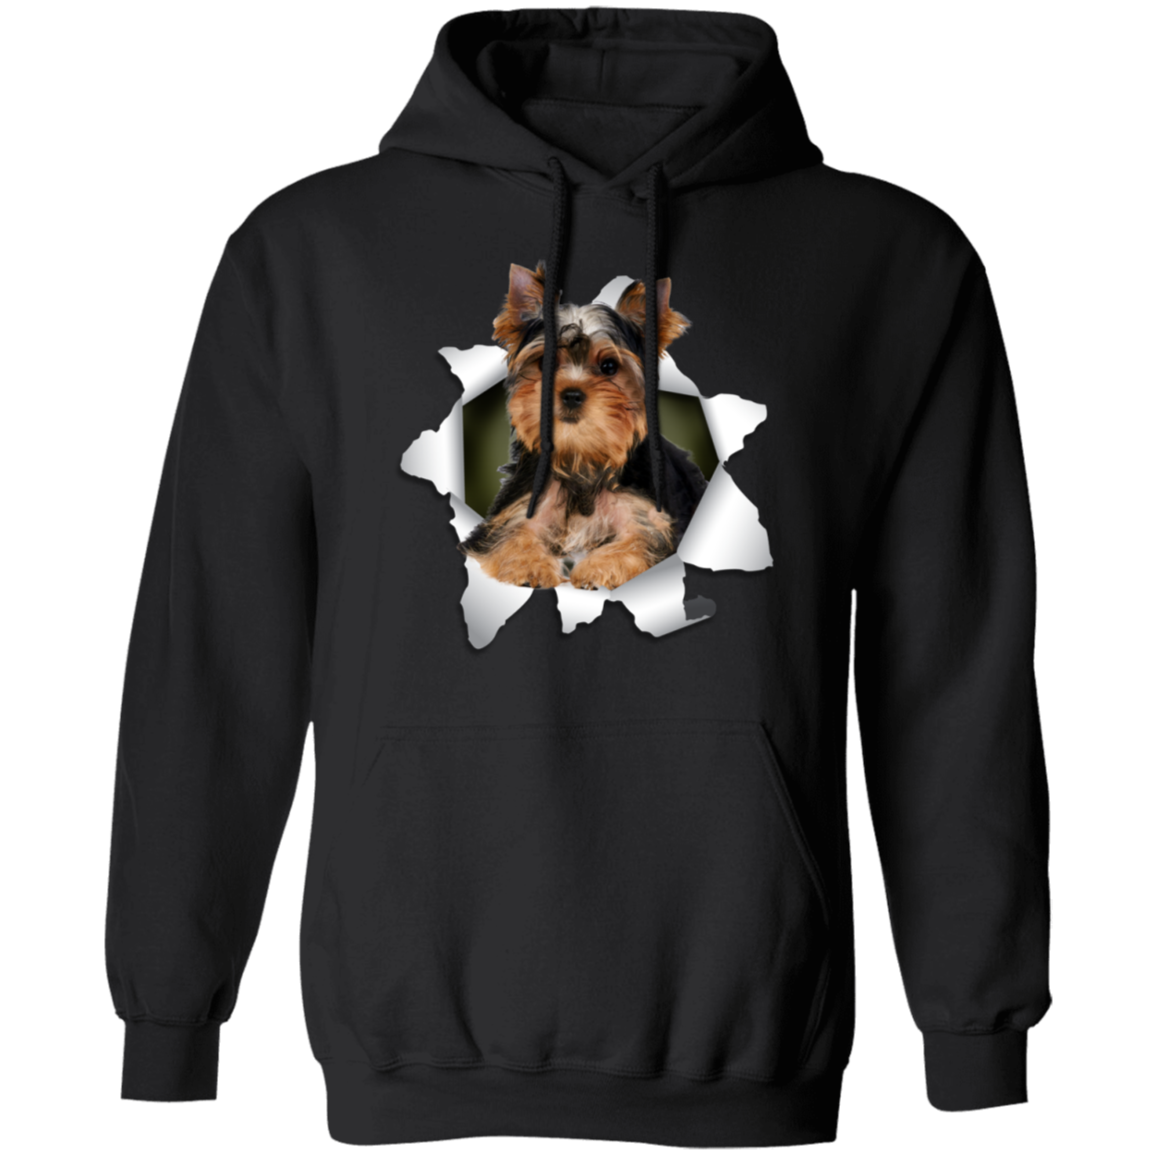 Canine's World Sweatshirts YORKSHIRE TERRIER 3D Pullover Hoodie 8 oz. Ultimate Shield